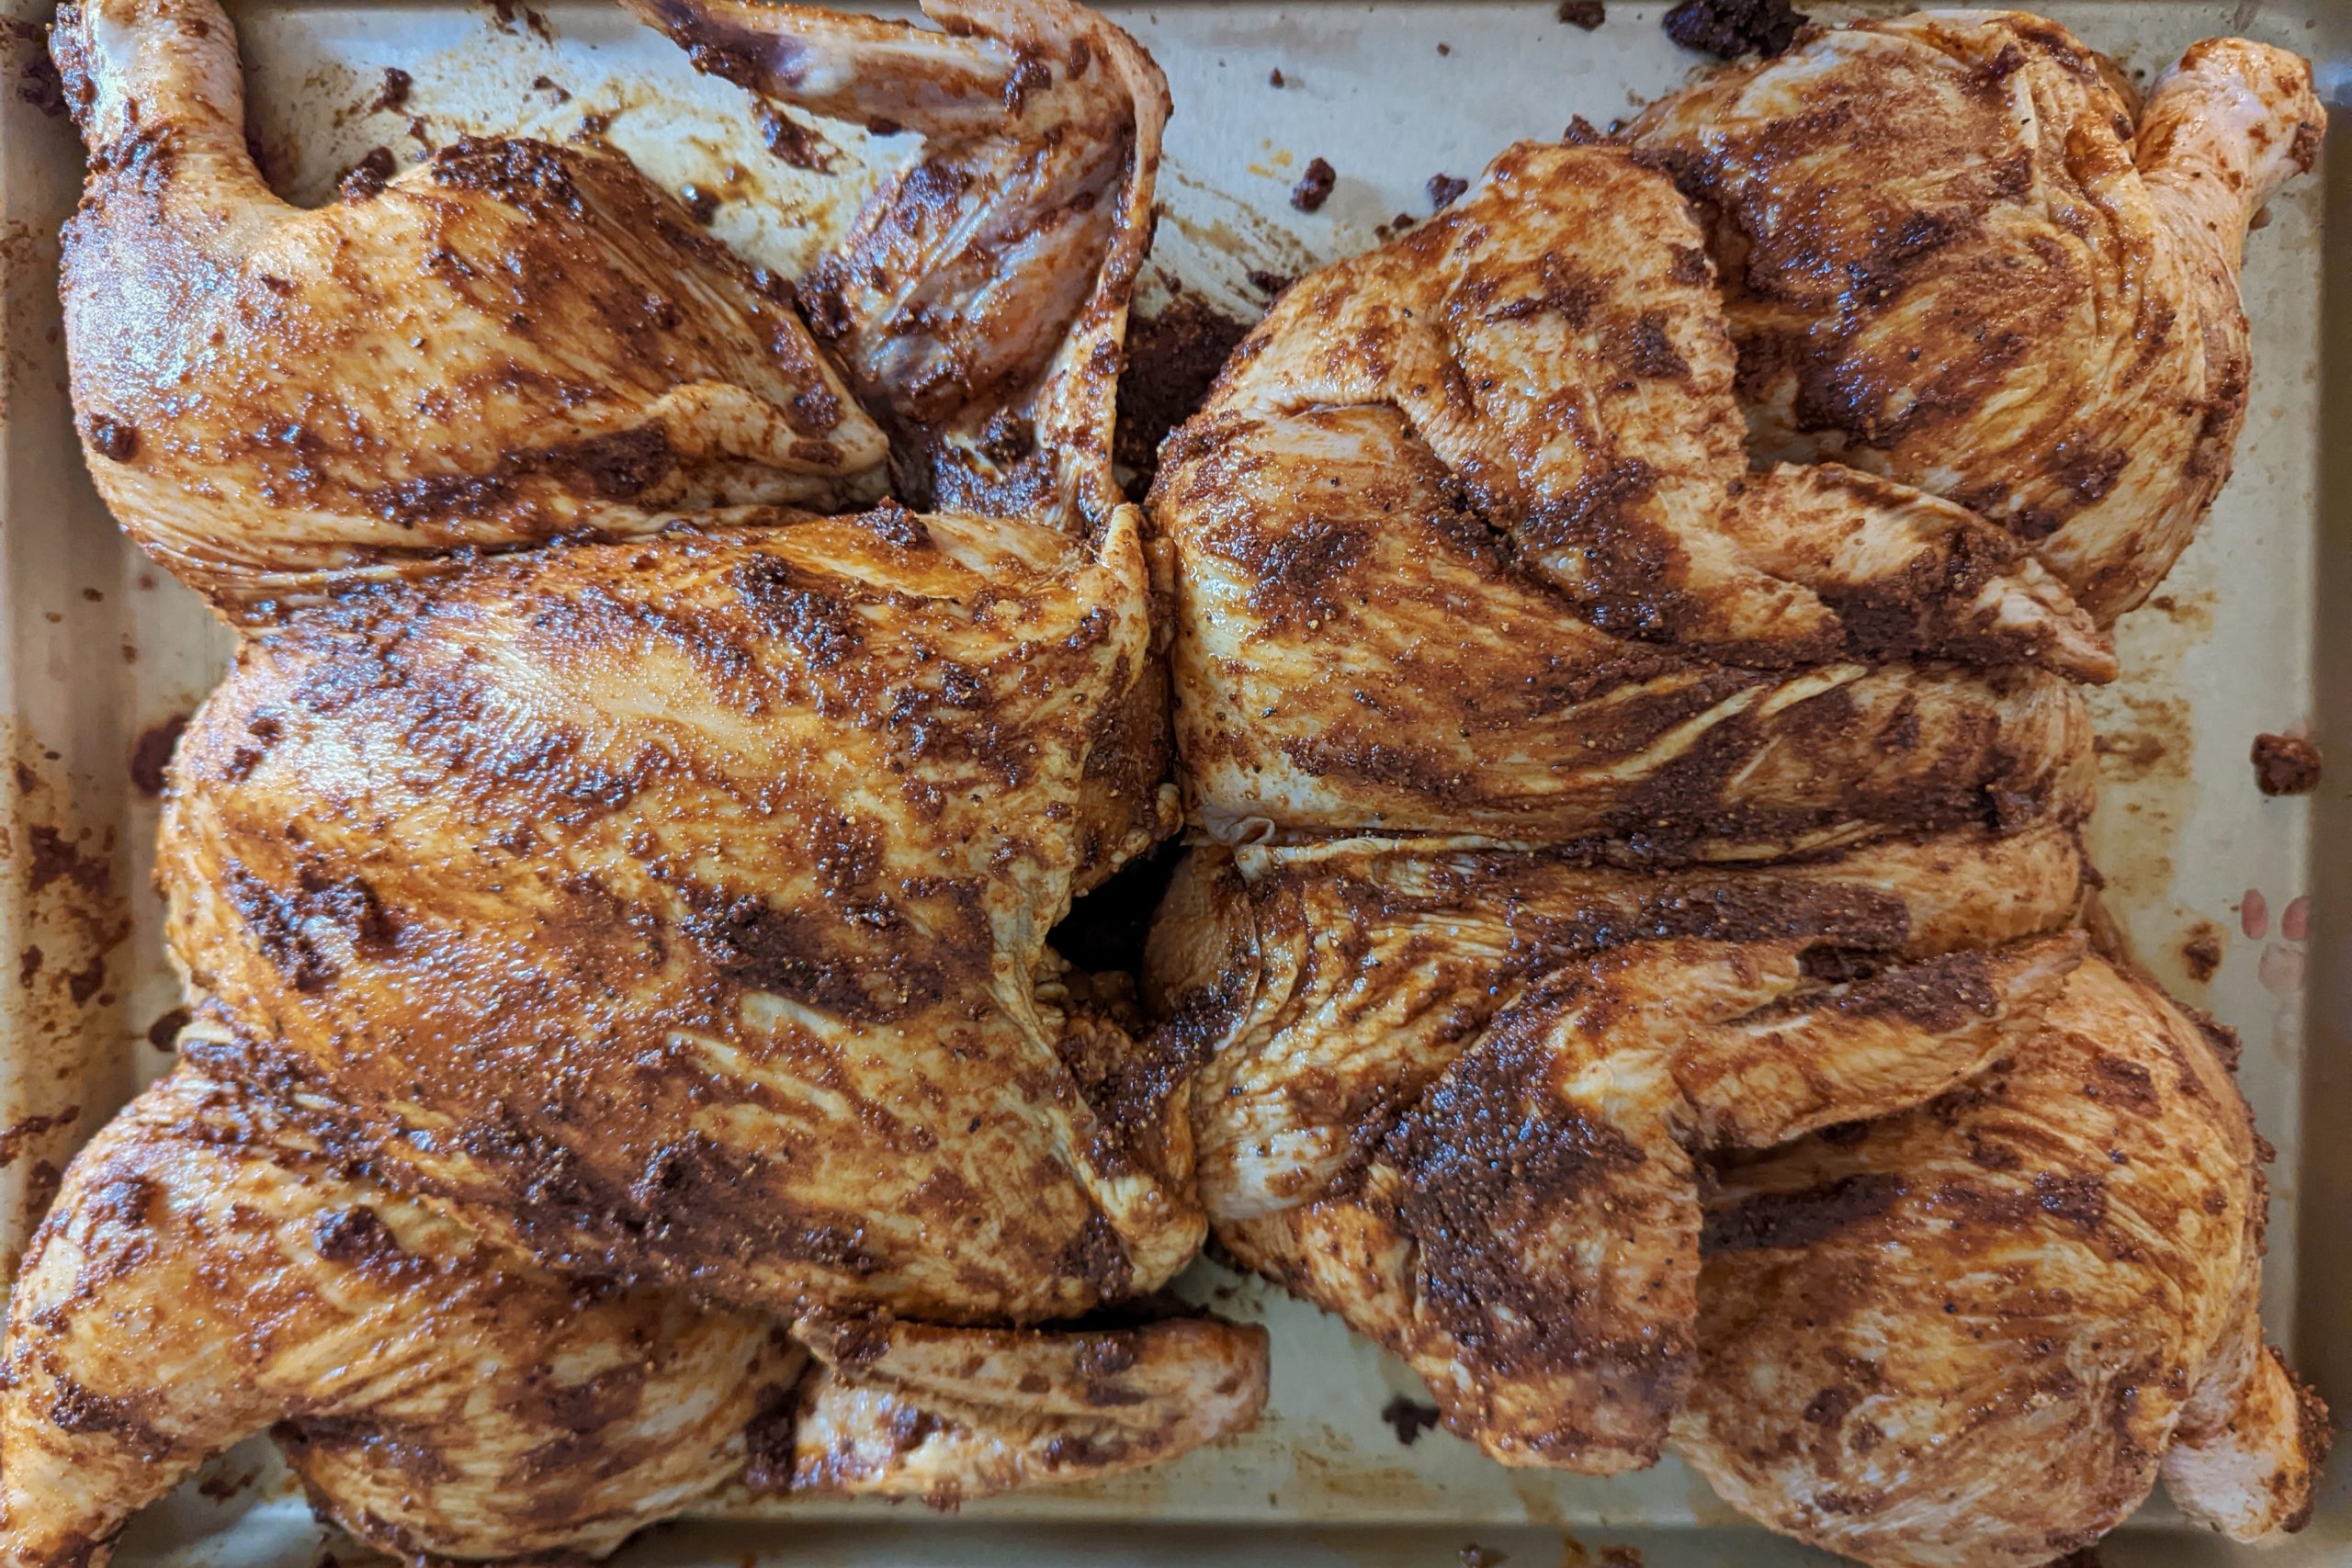 Peruvian roasted chicken covered in marinade and spices.